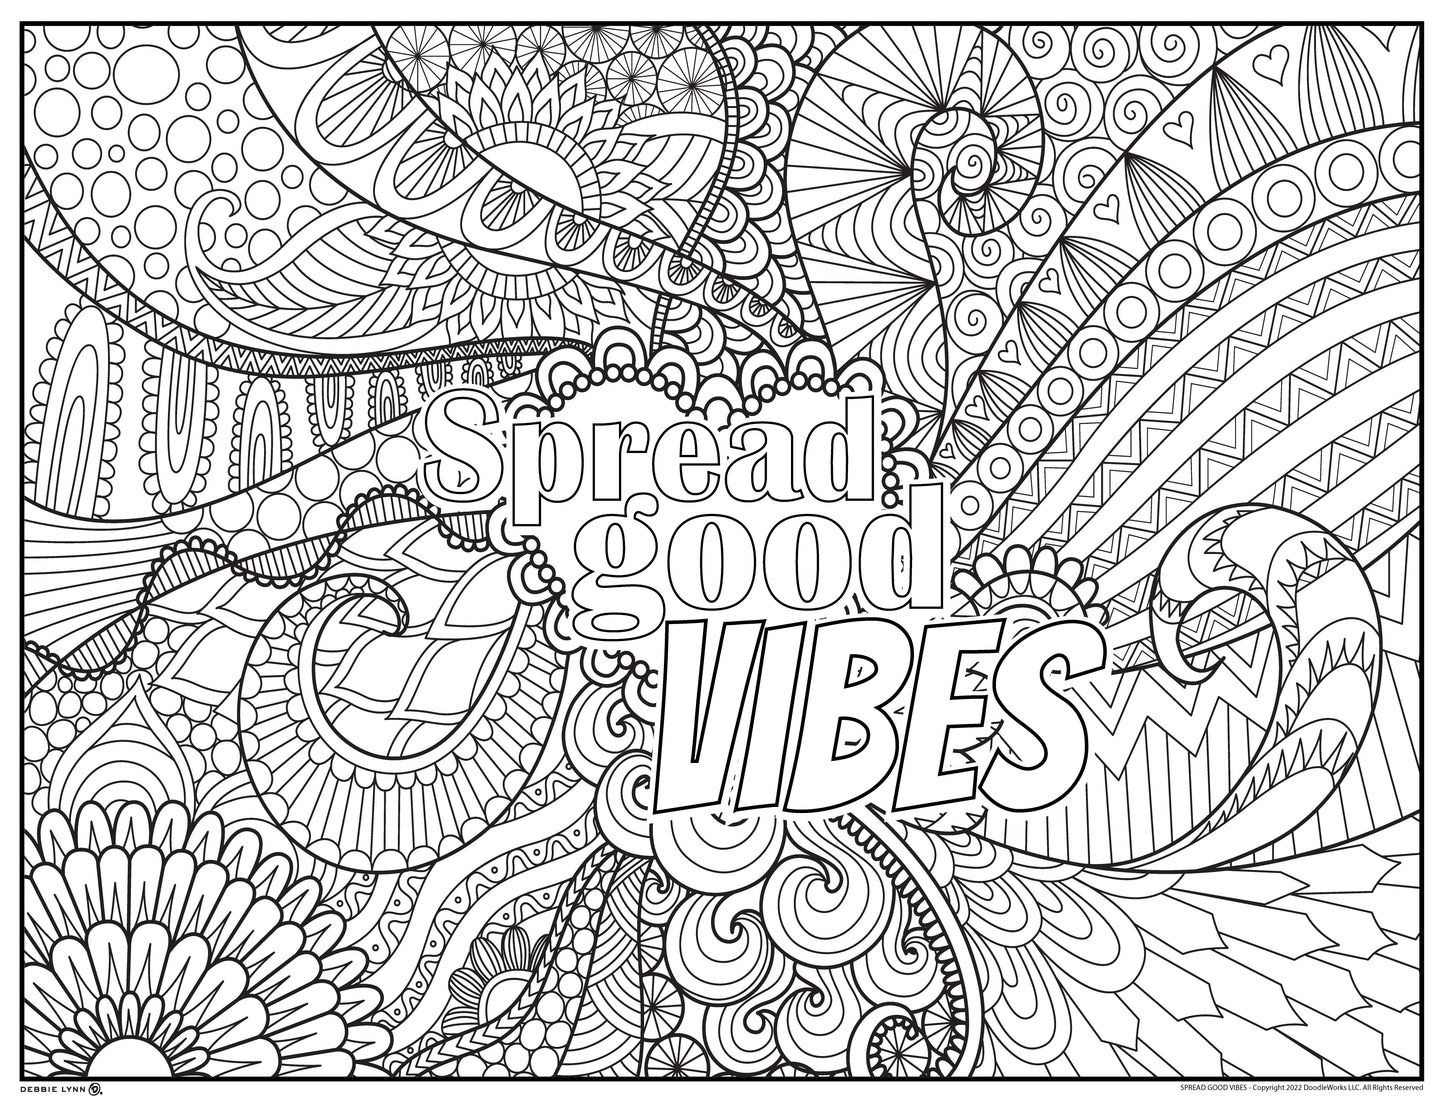 Debbie Lynn Rolled Coloring Posters 18x24 inches | Choose from 30 Designs